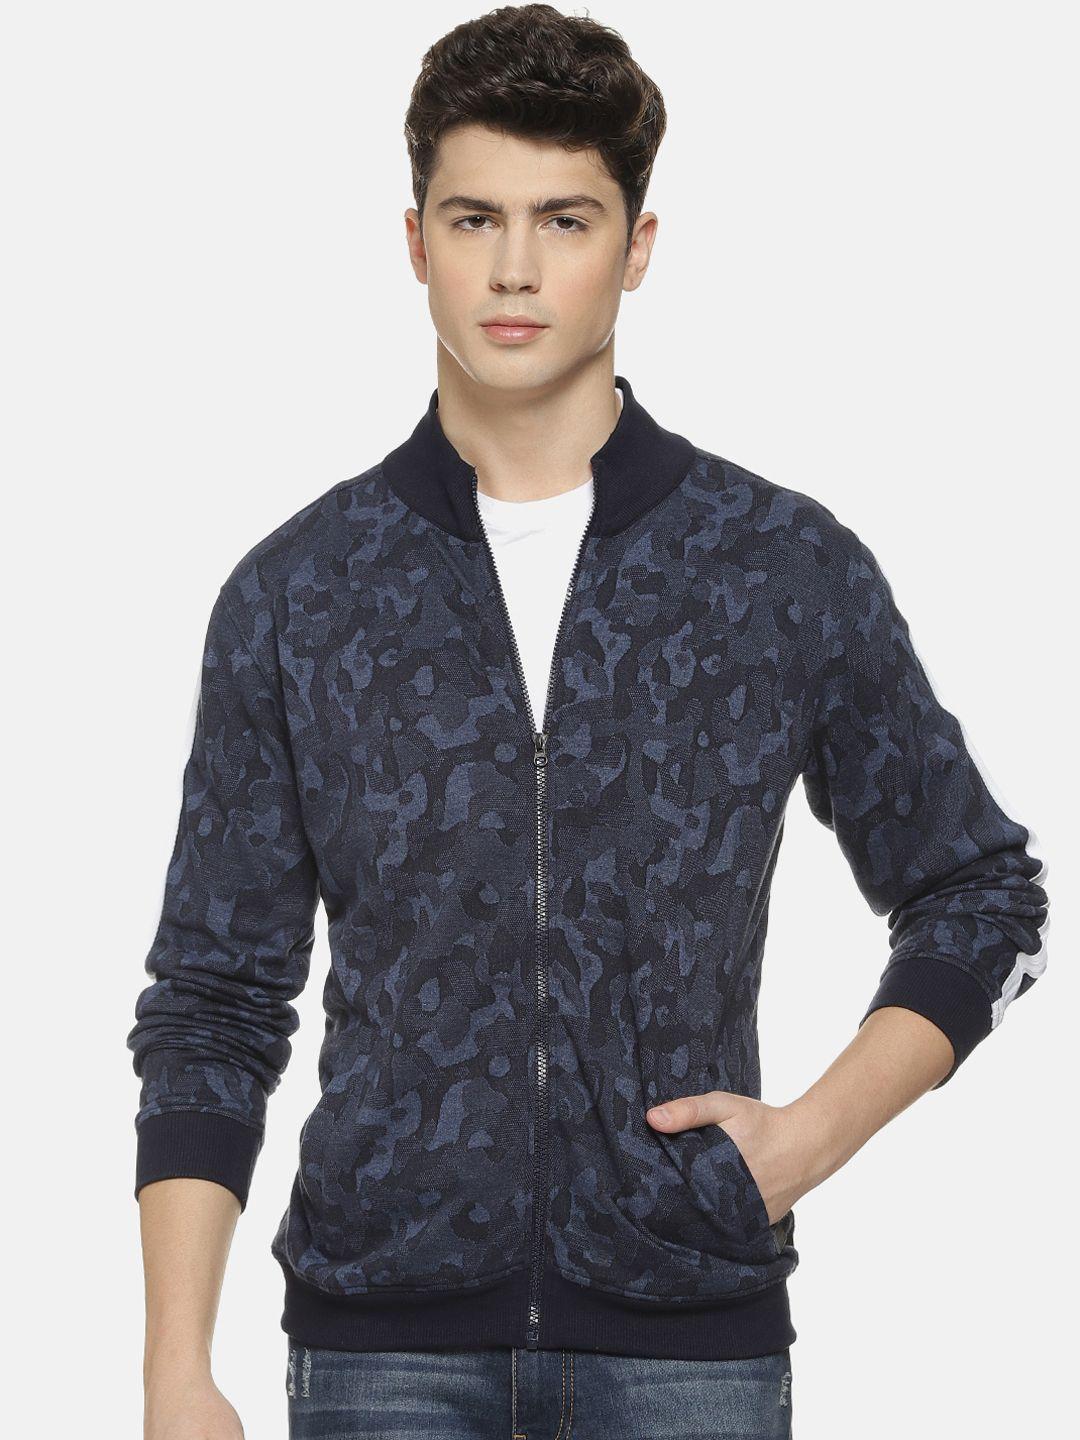 campus sutra men blue and black printed bomber jacket